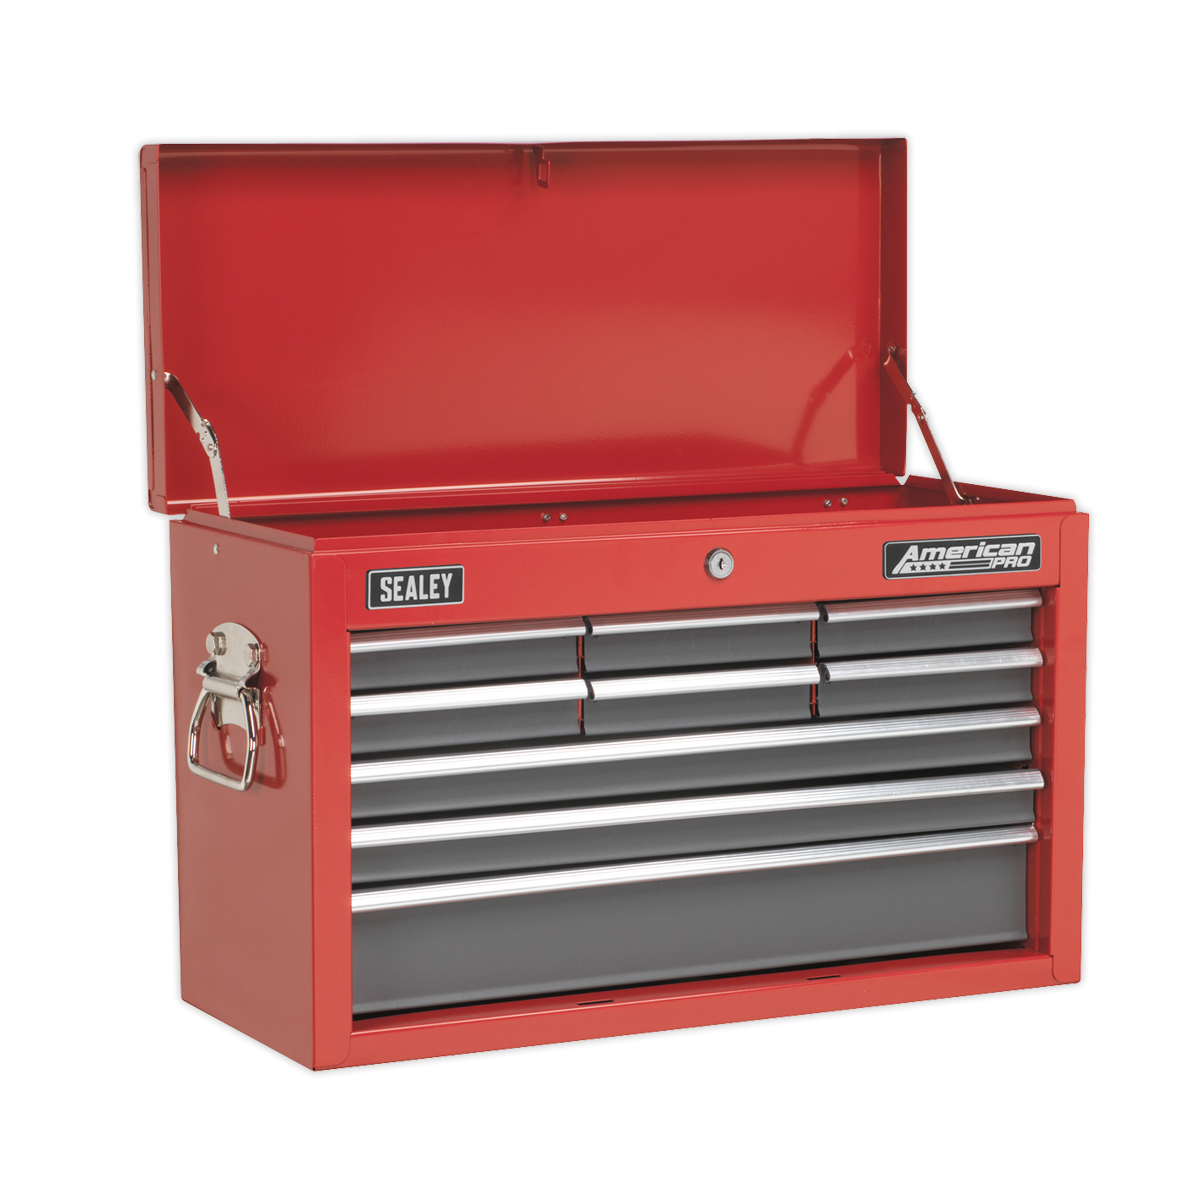 Sealey AP22509BB 9 Drawer Topchest with Ball Bearing Runners, Red/Grey